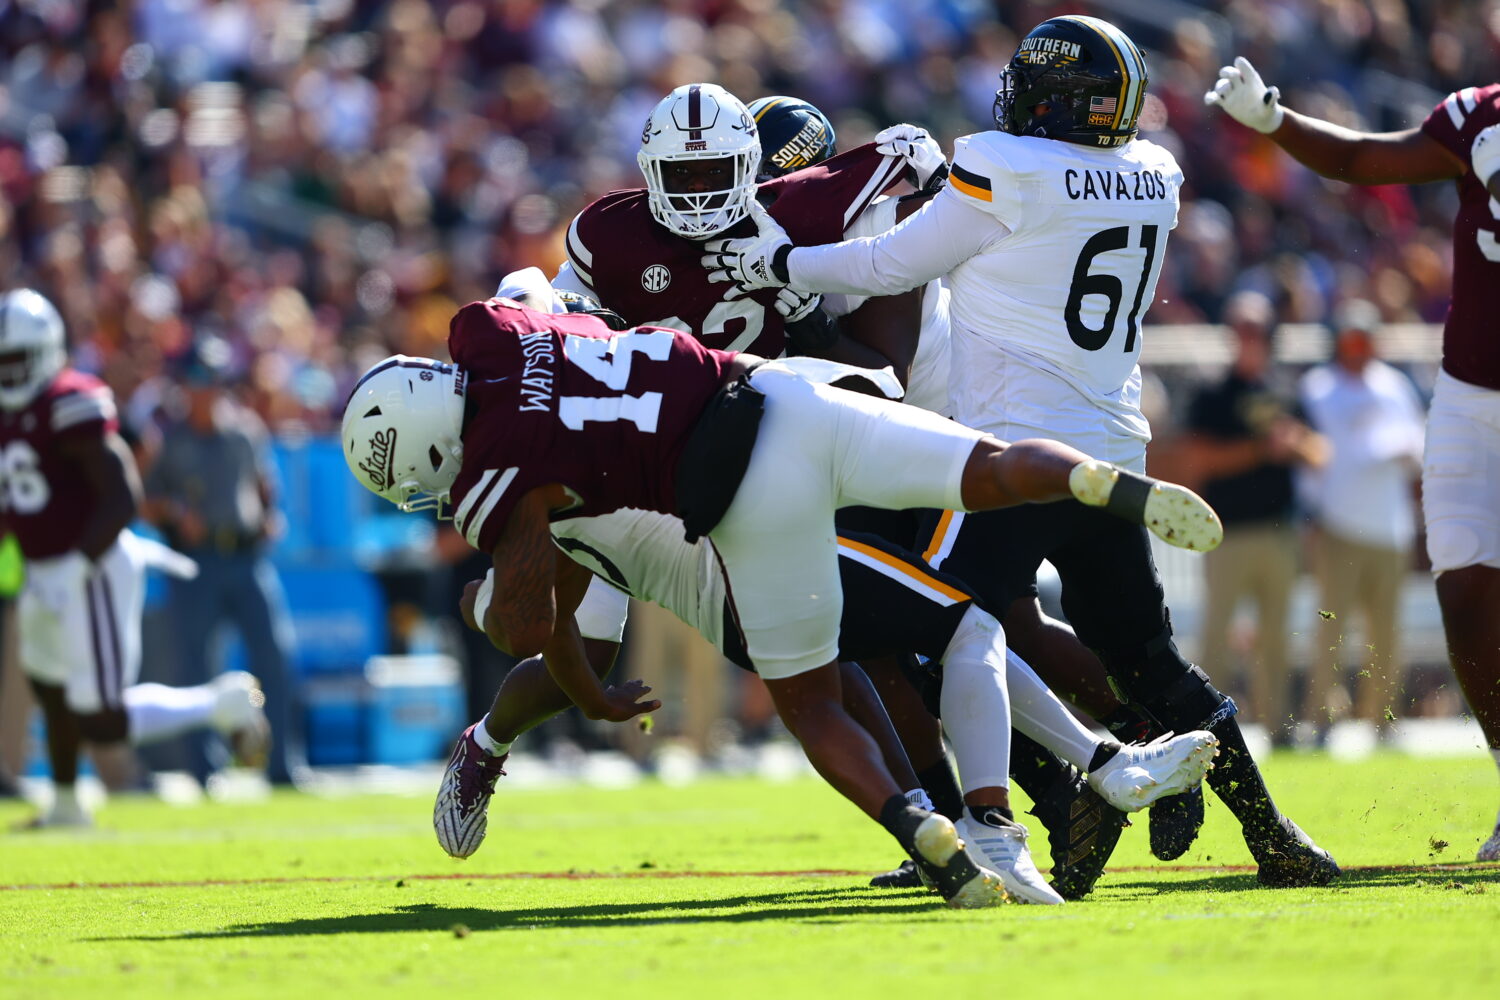 Moments that mattered in Mississippi State’s 41-20 win over Southern Miss